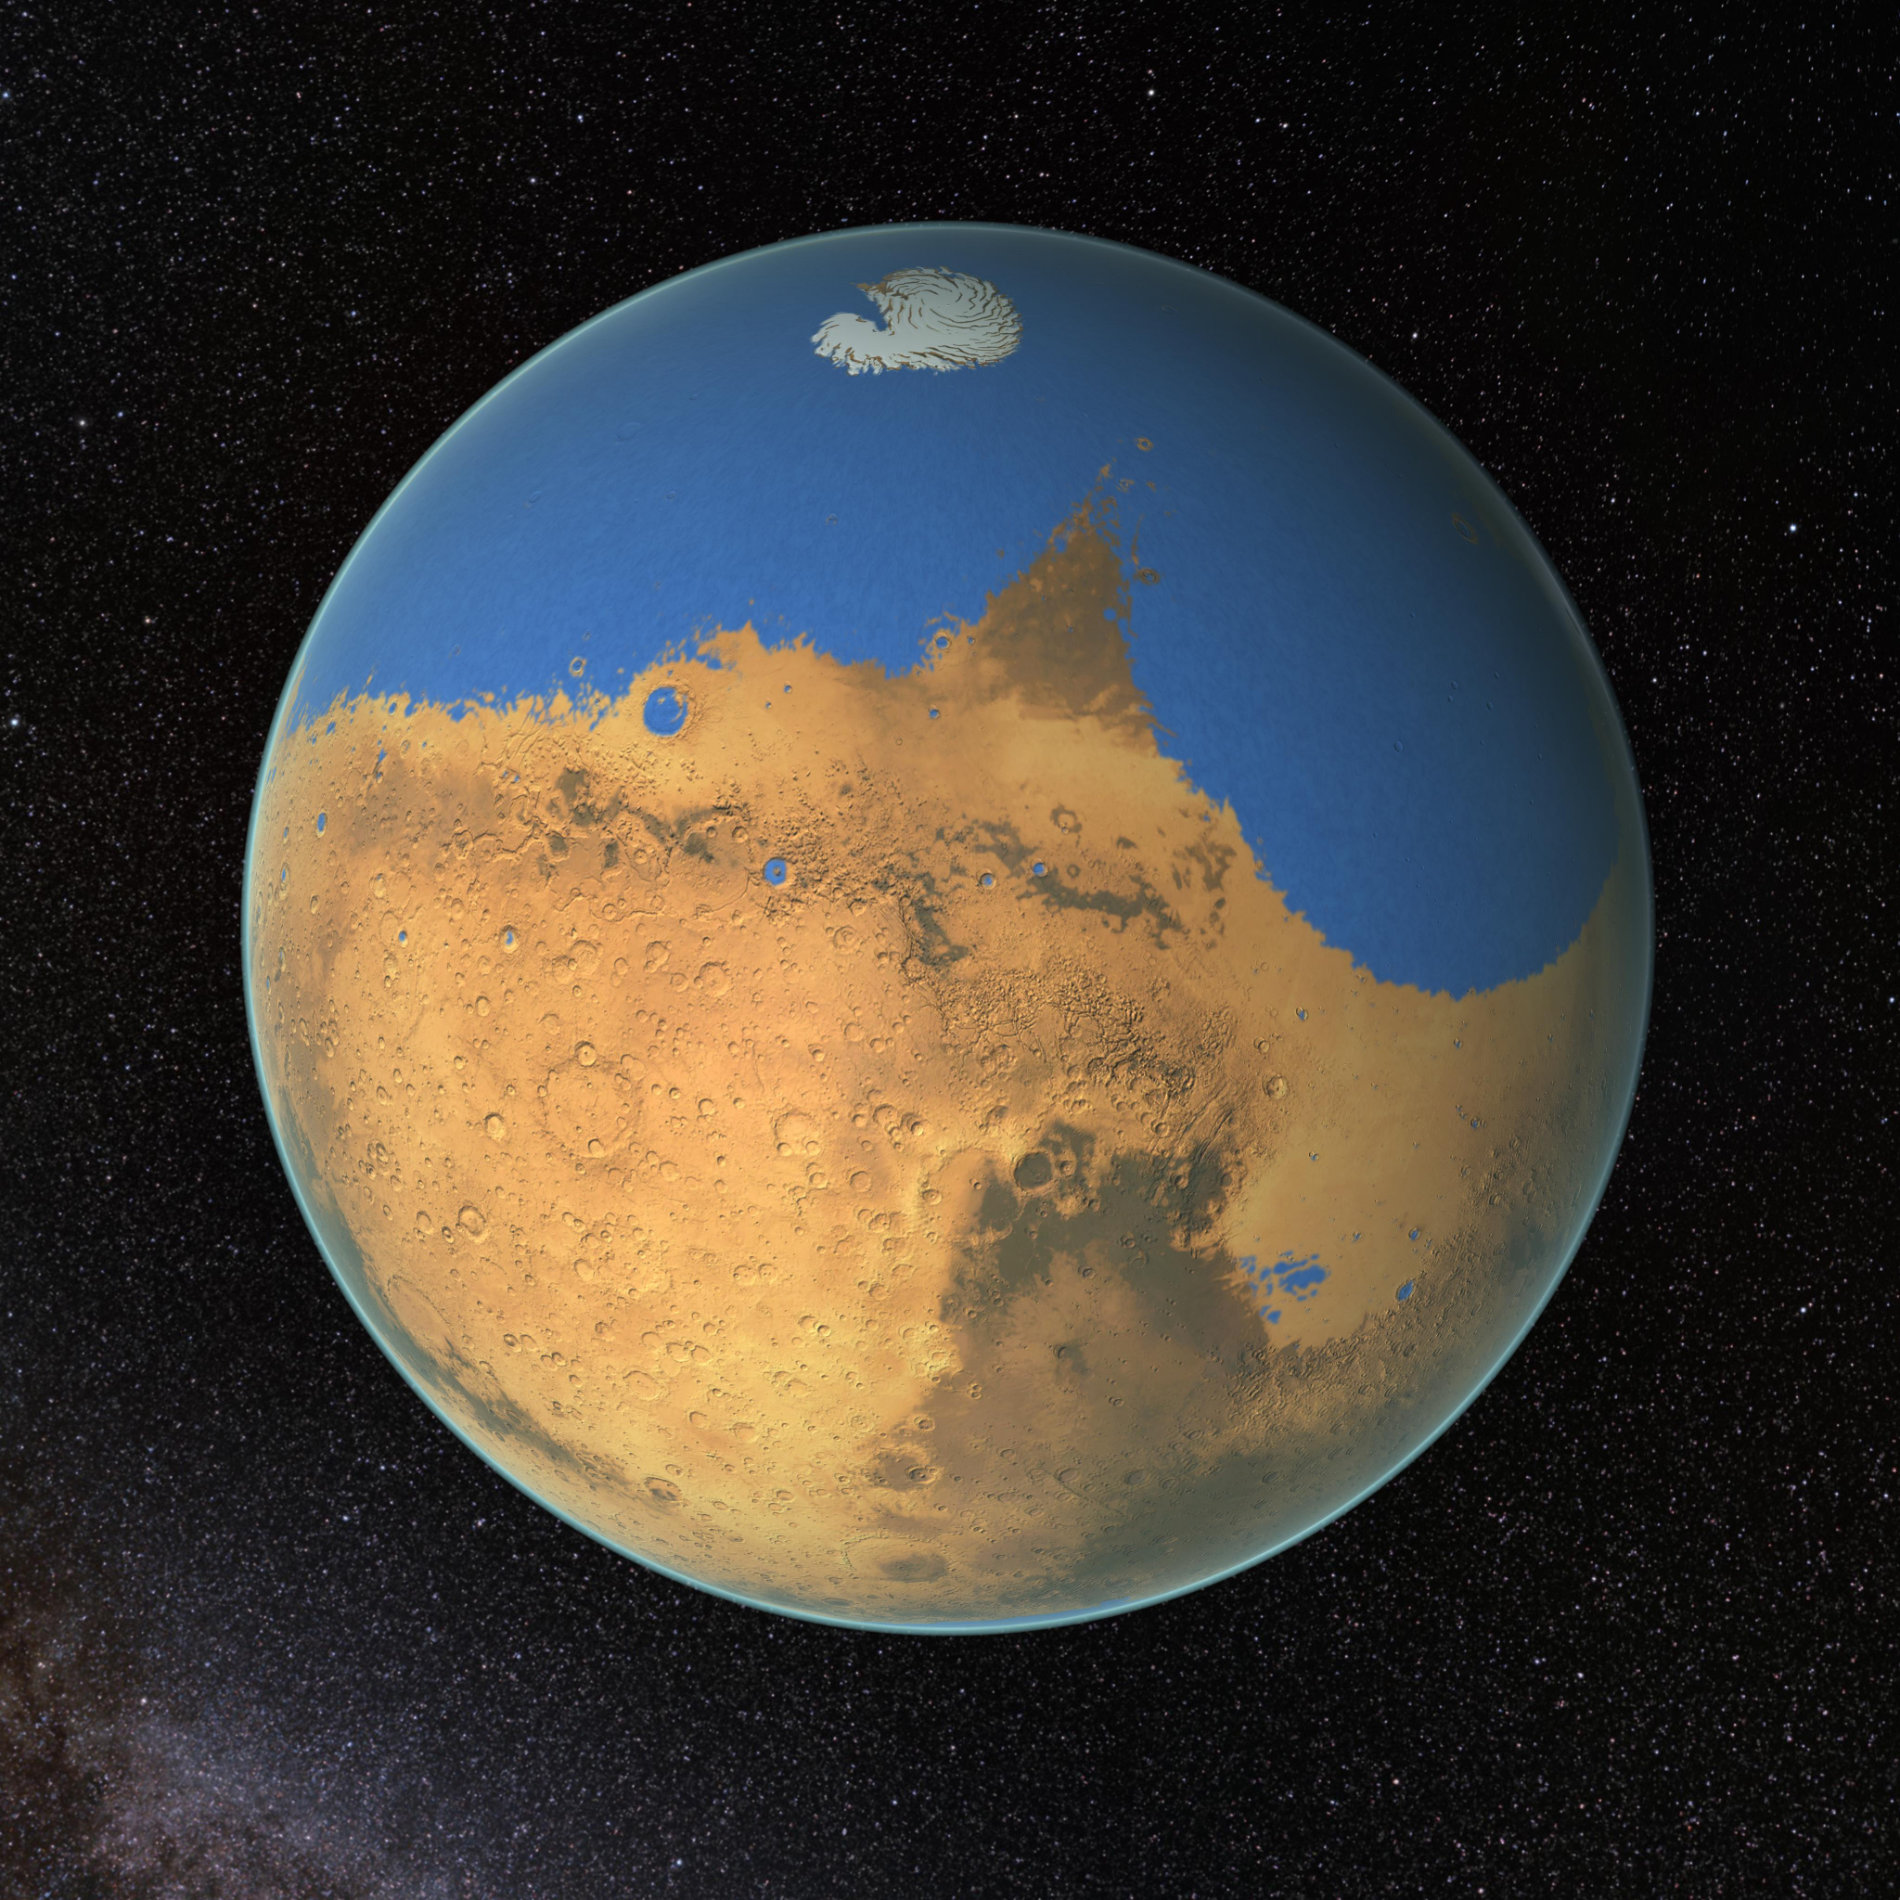 A primitive ocean on Mars proposed by NASA scientists